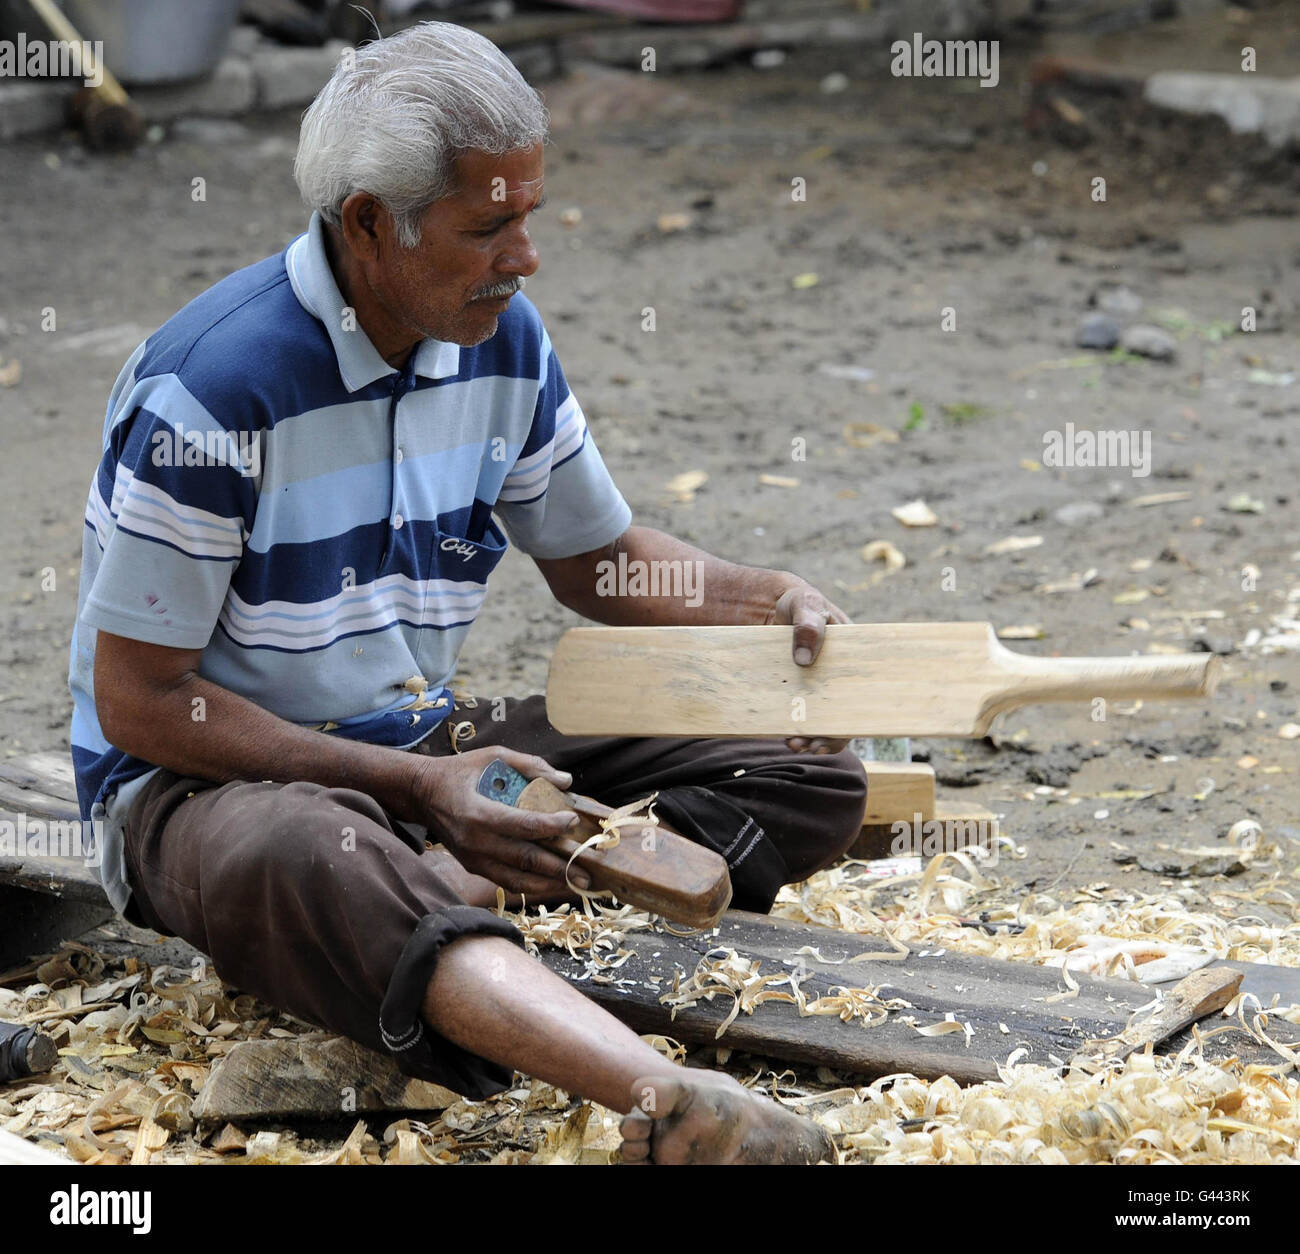 A man makes cricket bats next to the road in Nagpur city centre, India. Stock Photo